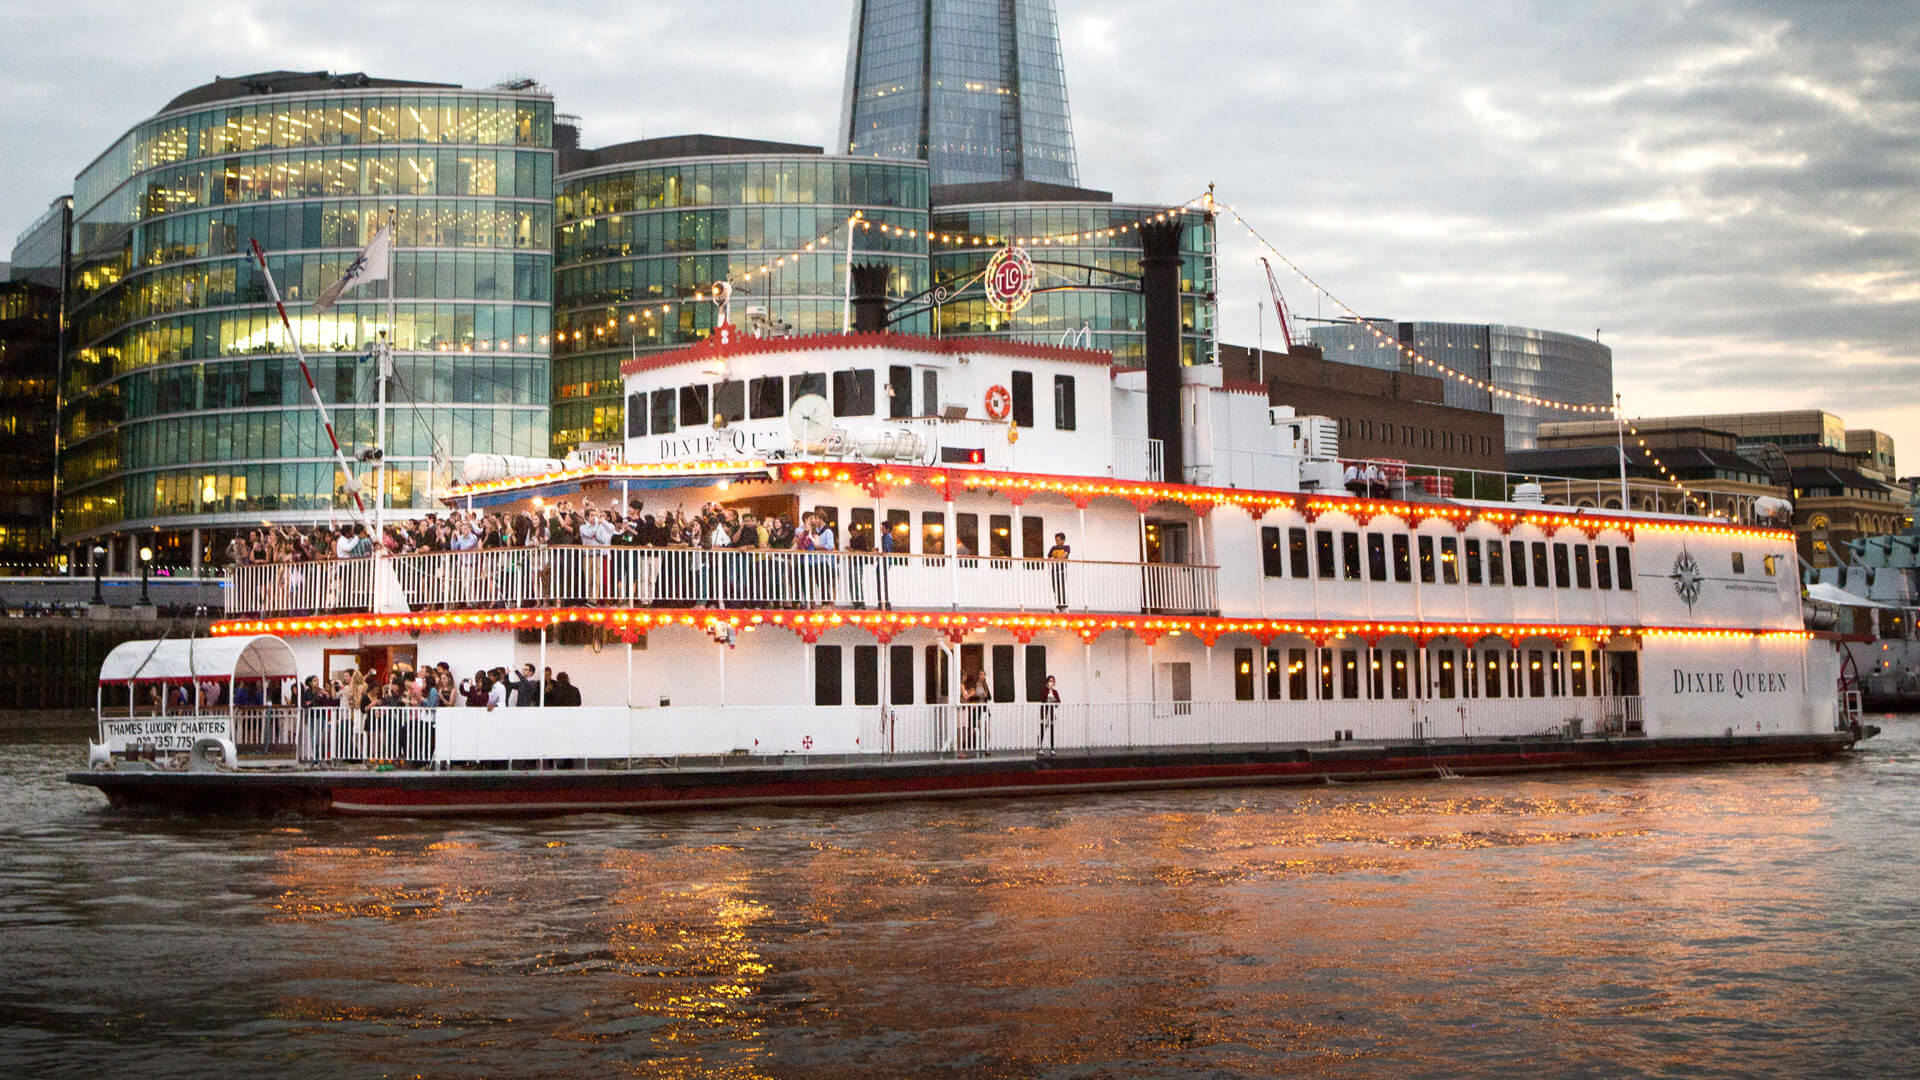 Summer River Boat Party – On Board The Dixie Queen 